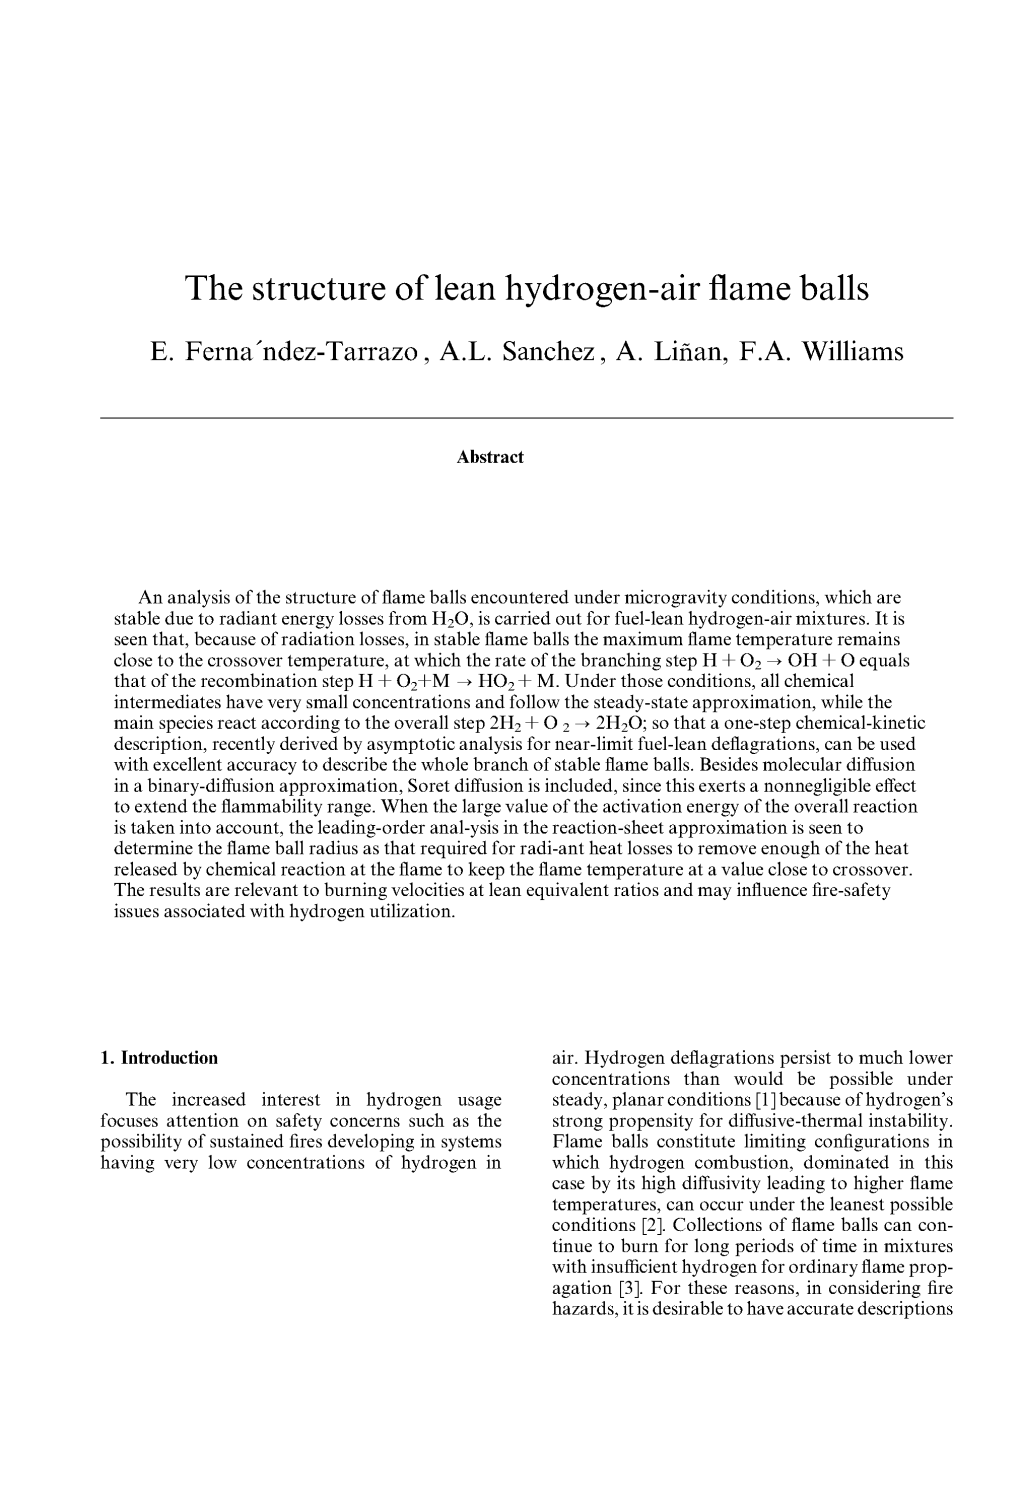 The Structure of Lean Hydrogen-Air Flame Balls